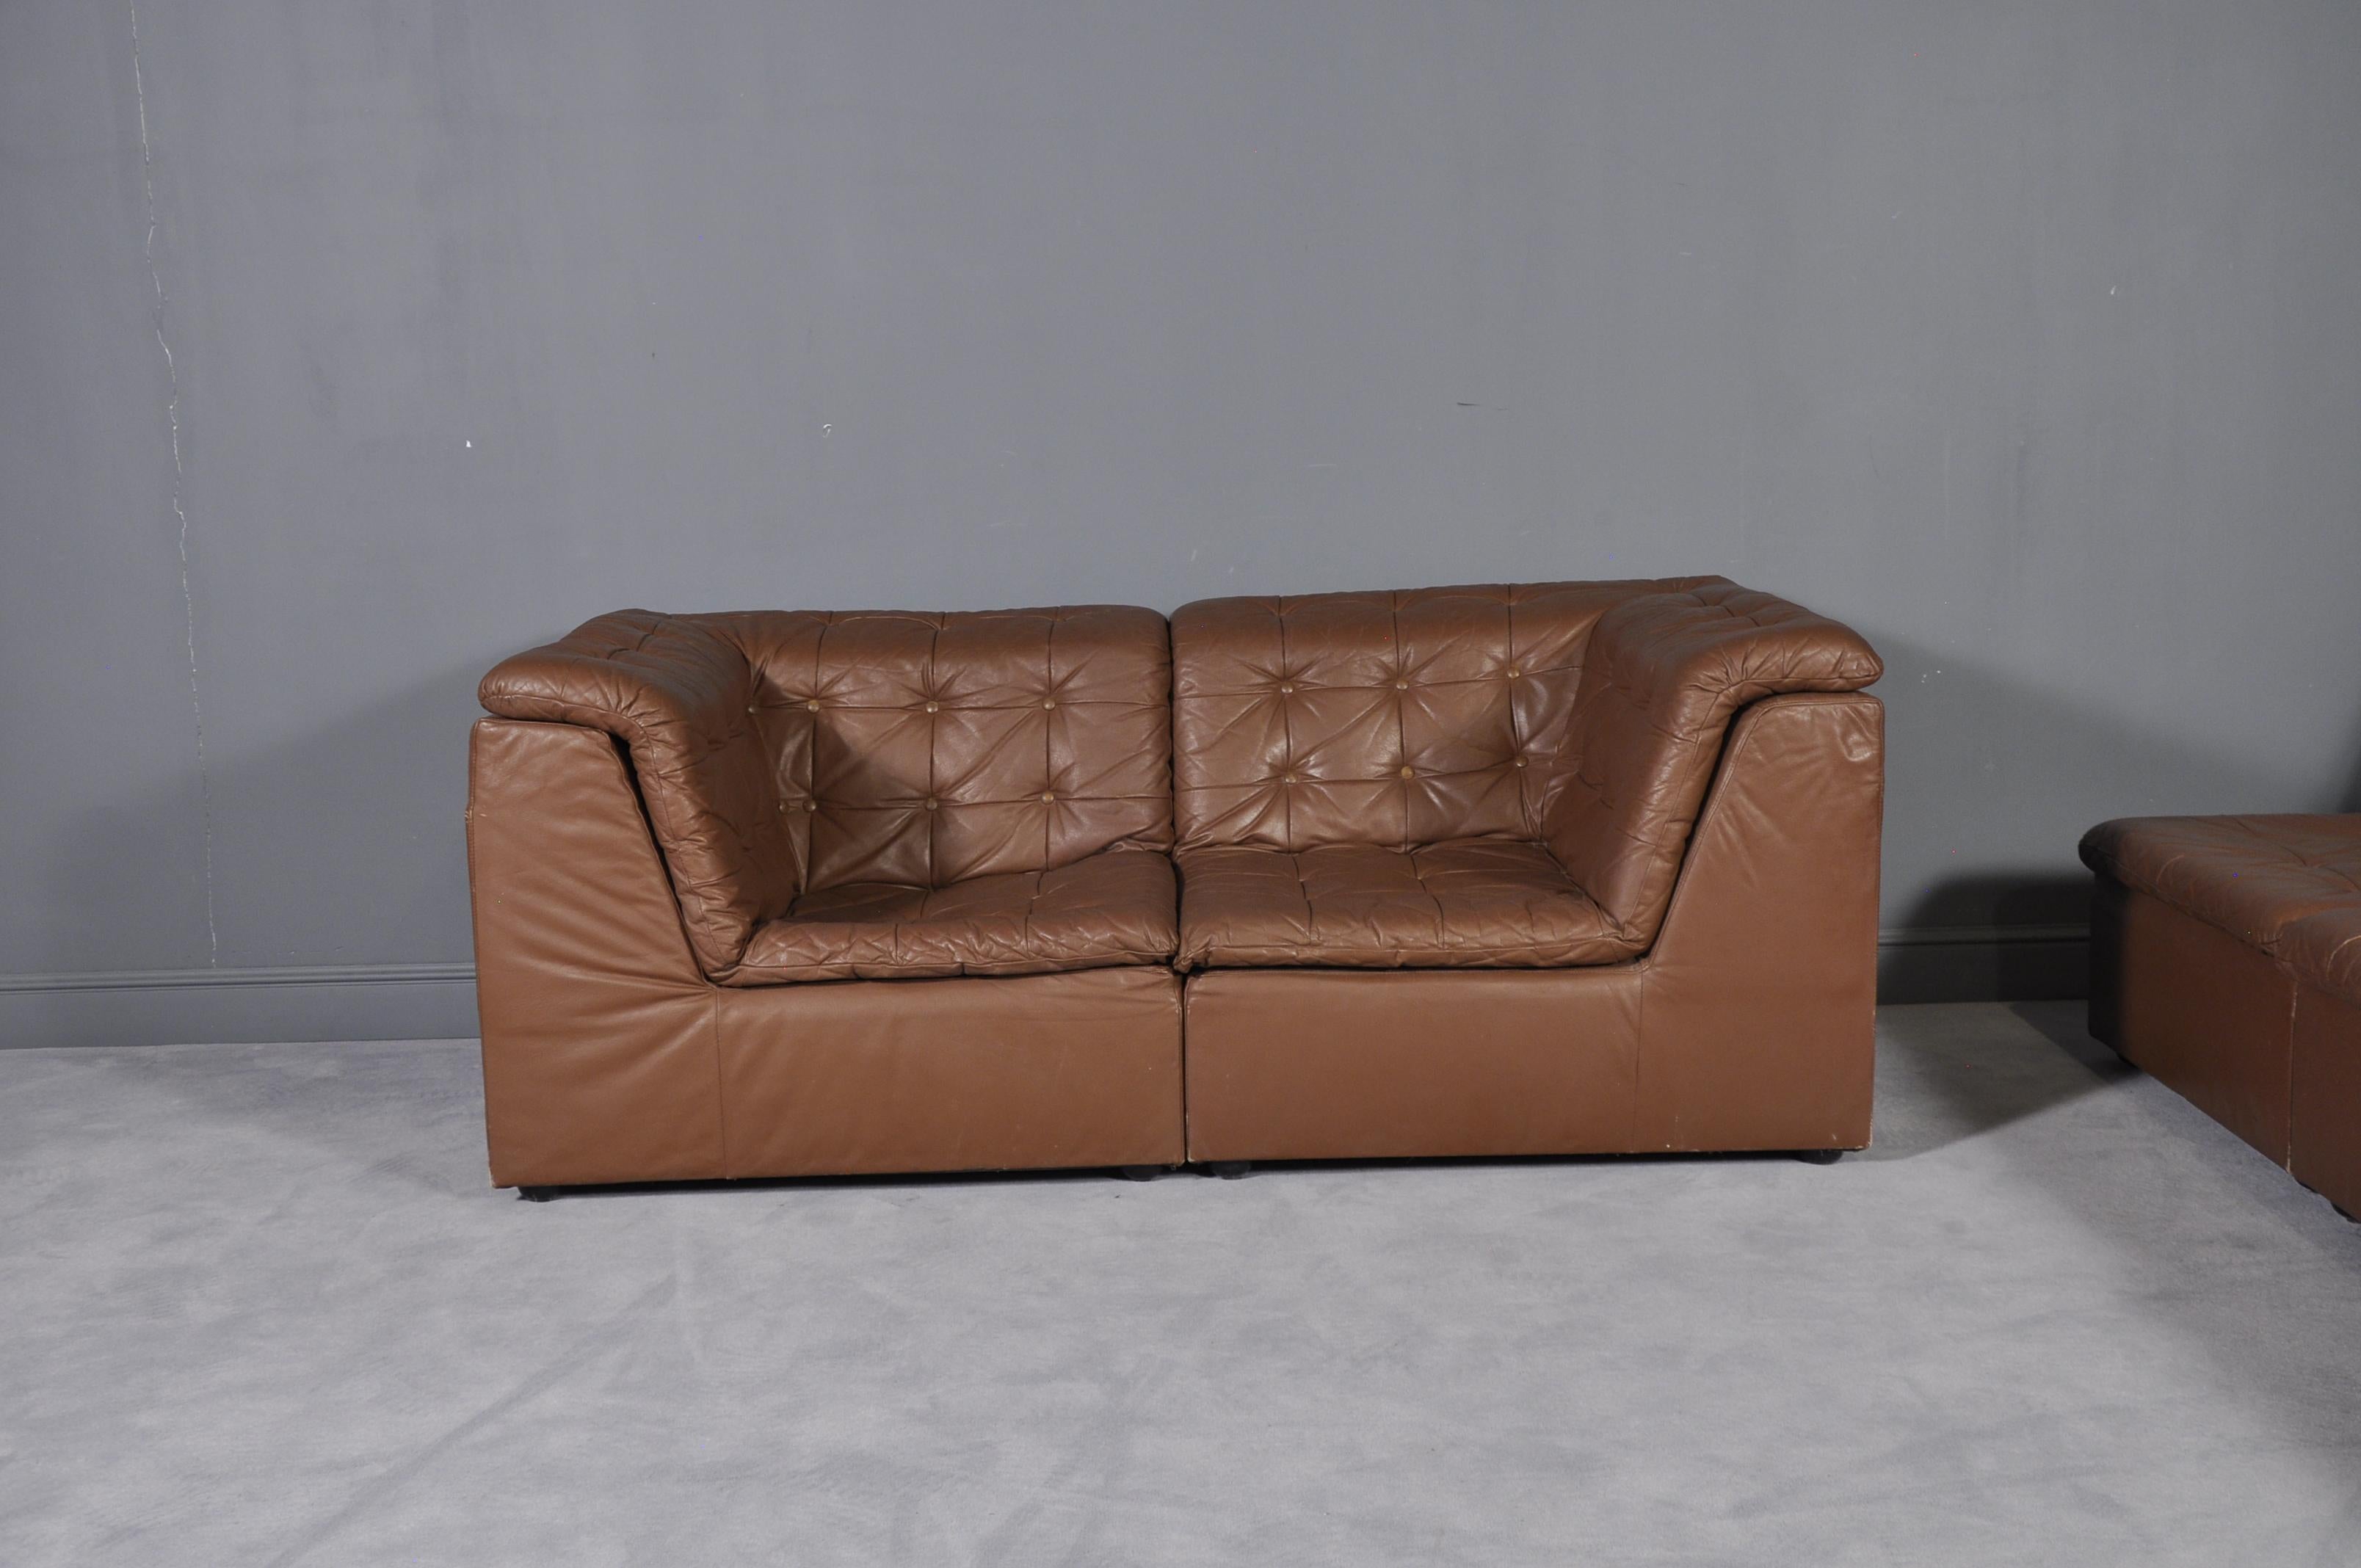 Cognac Leather “De Sede Style” Patchwork Modular Sofa from Laauser, Germany 1970 For Sale 2